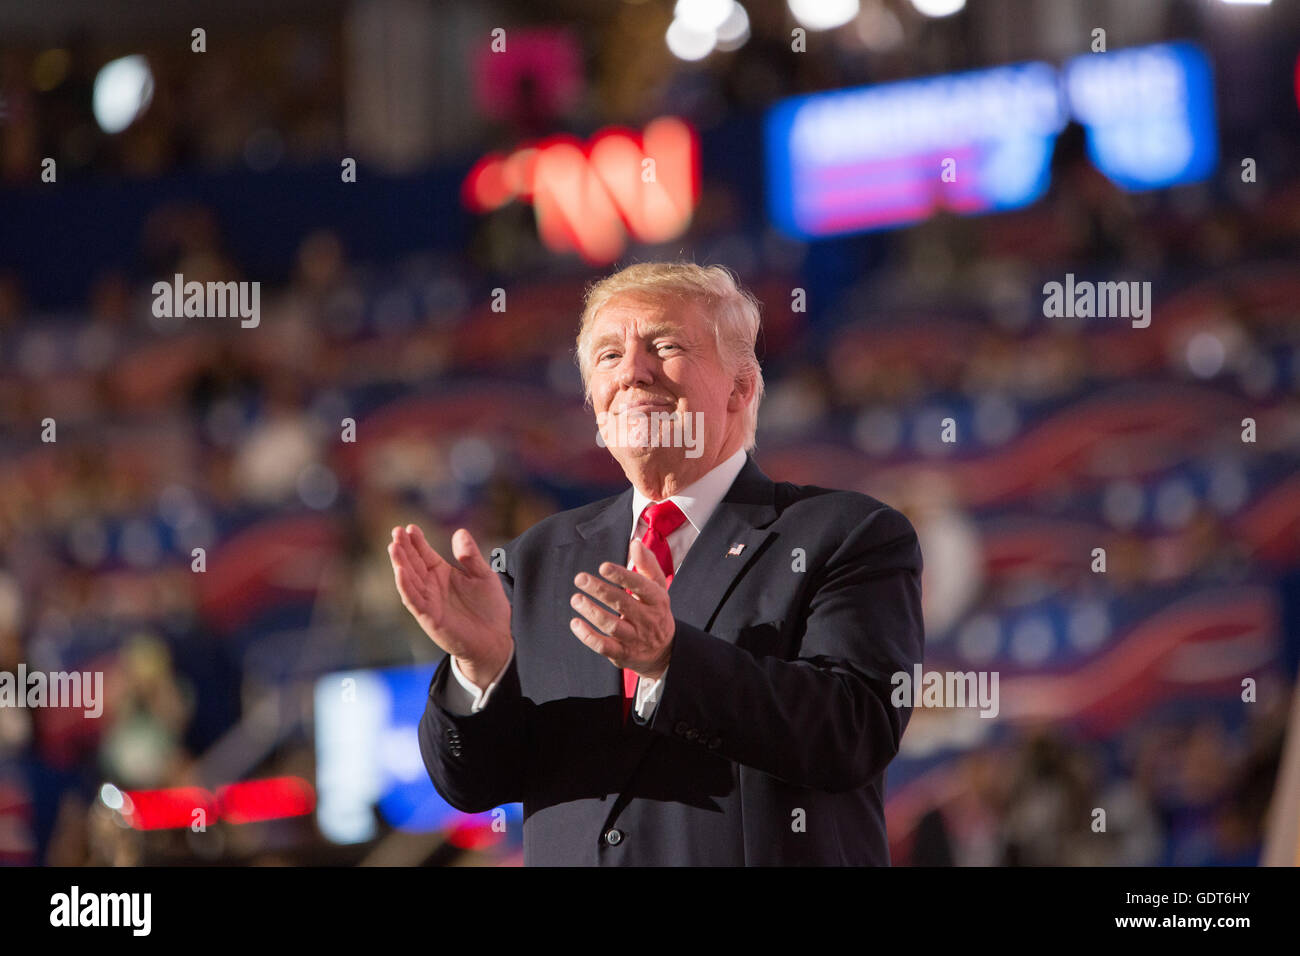 Cleveland, Ohio, USA; July 21, 2016: Donald J. Trump accepts the nomination to run for president of the United States, at the Republican National Convention. (Philip Scalia/Alamy Live News) Stock Photo